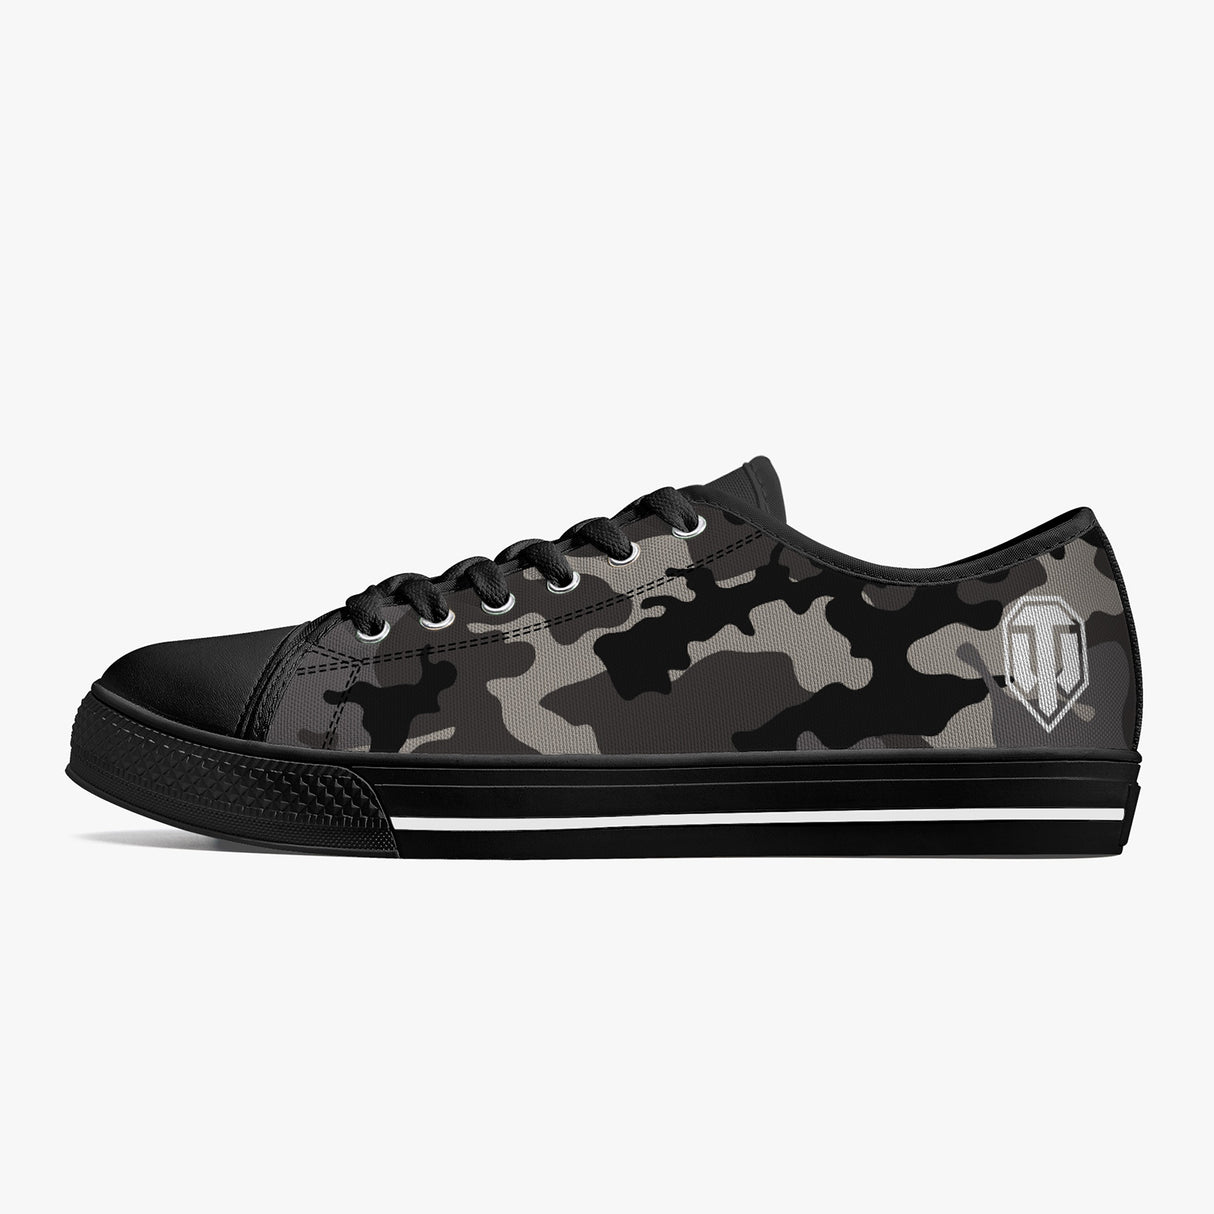 World of Tanks Low Top Canvas Trainer - Urban Camo